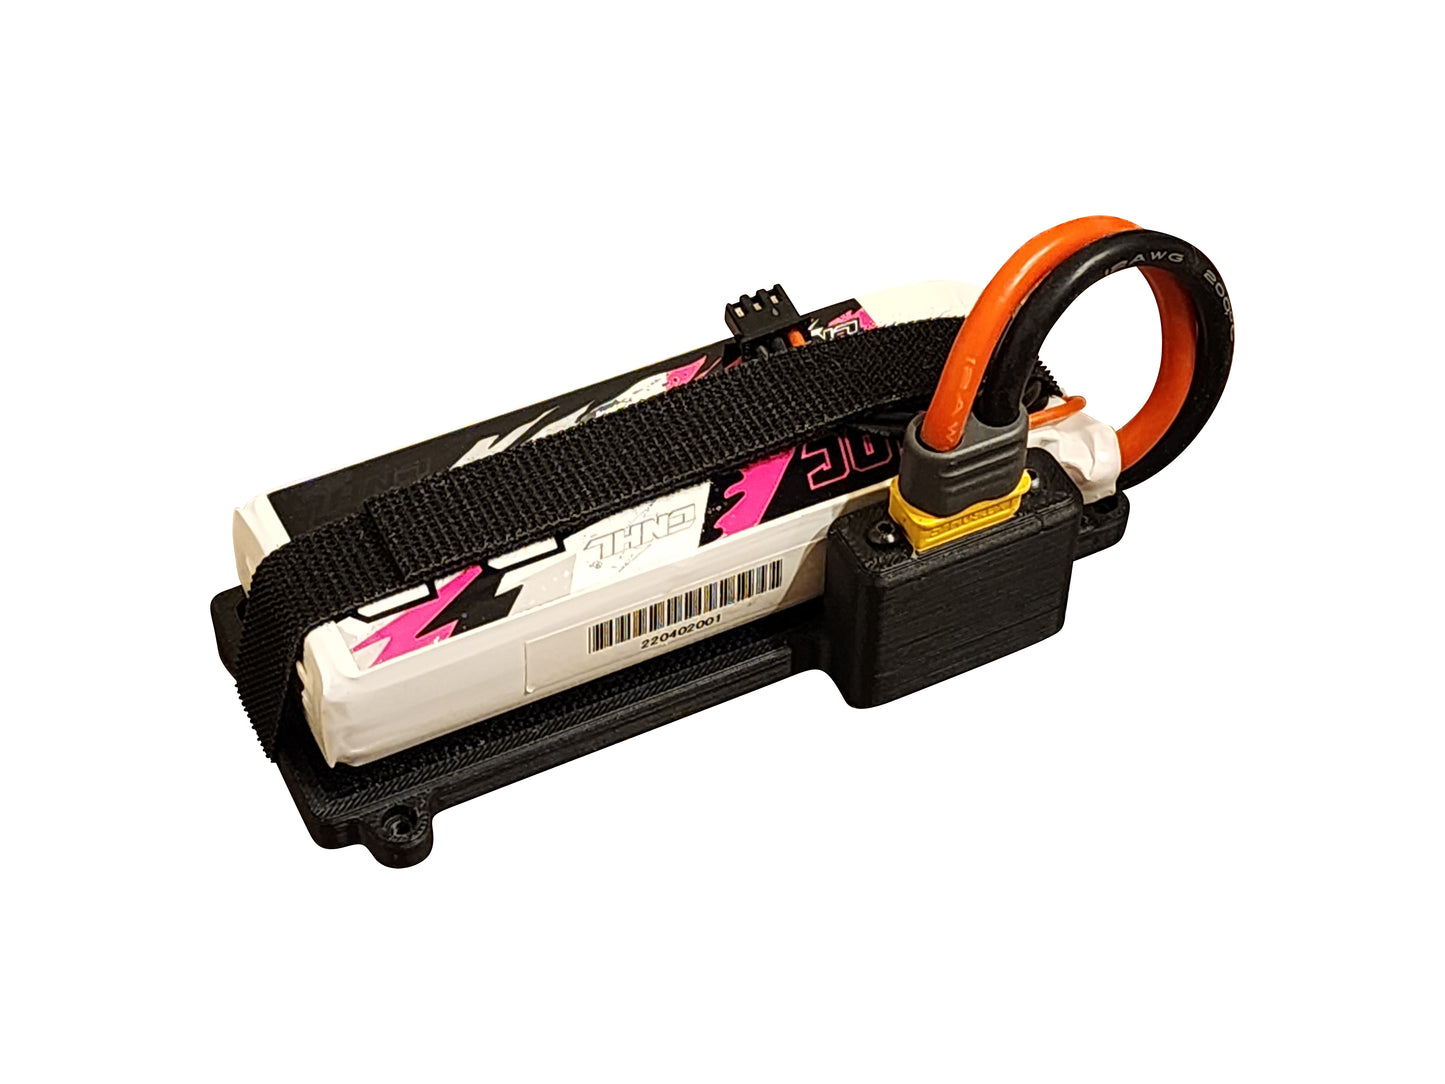 2-3s 2200mAh LiPo Mount with Integrated XT60 Connector